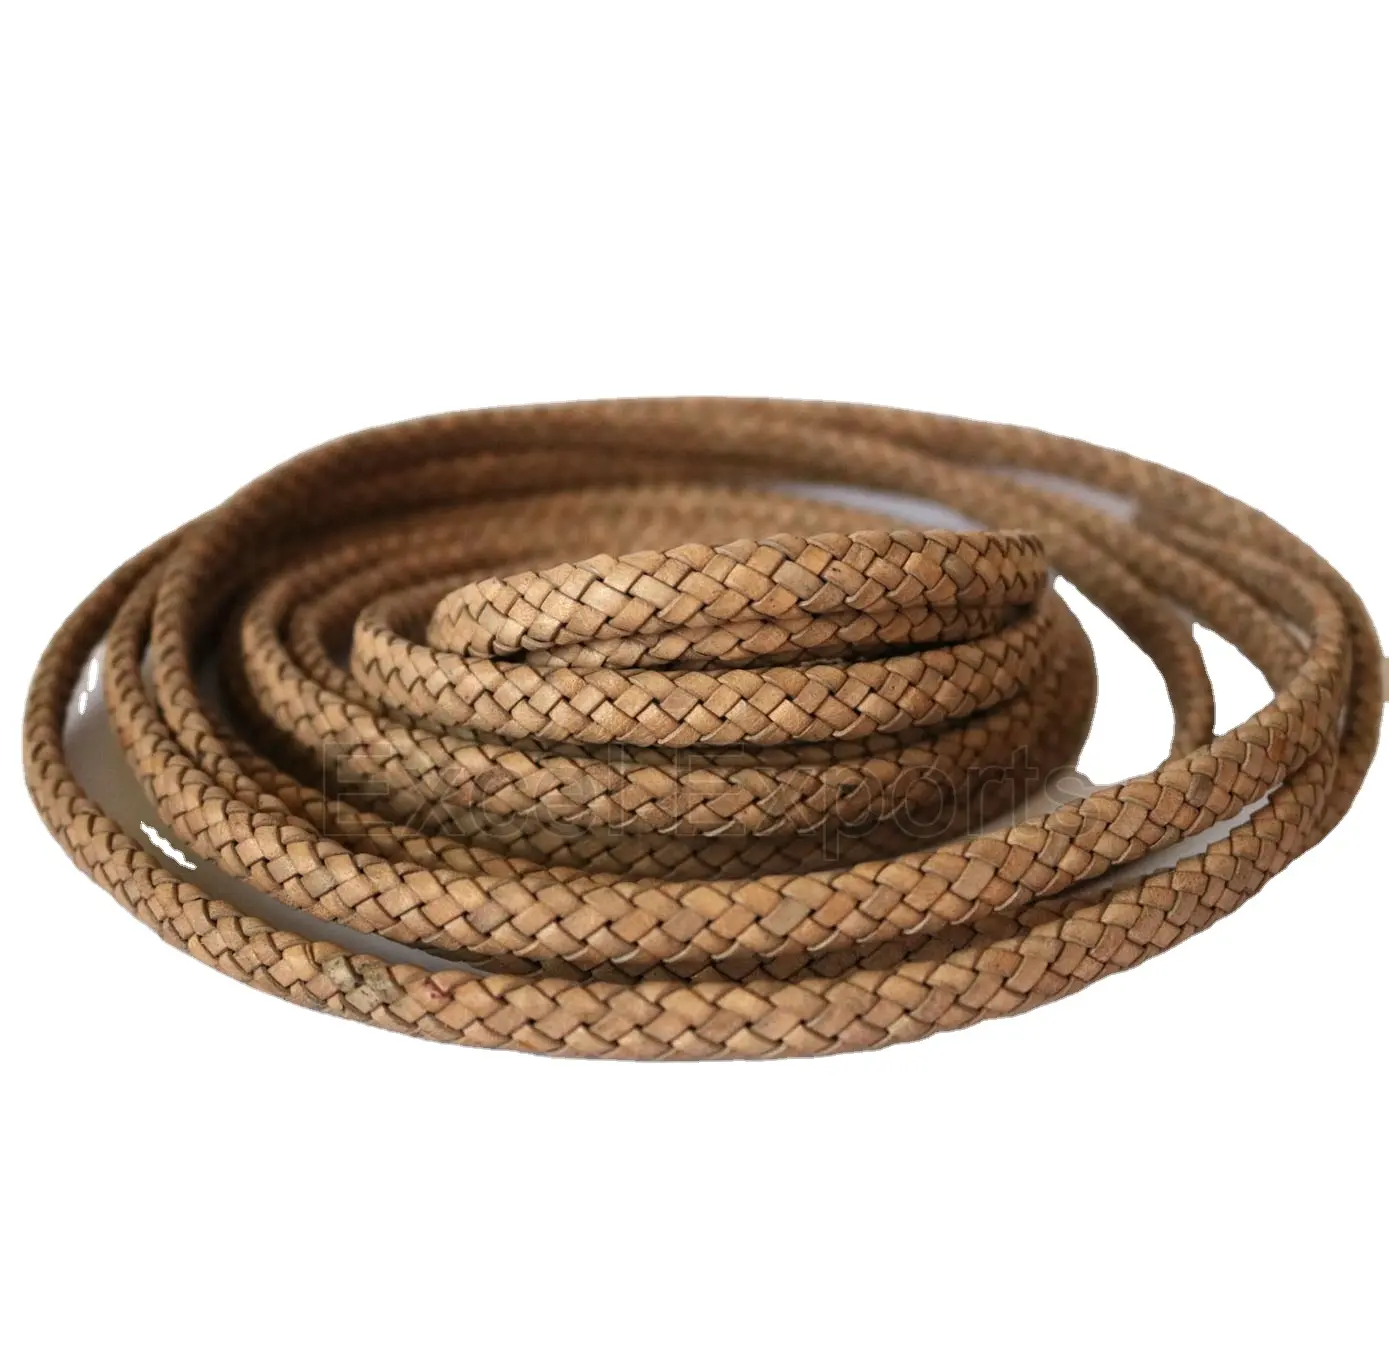 Factory Outlets braided leather cord 10x6mm Oval Braided Multi purpose cord for jewelry making bracelets decorative straps